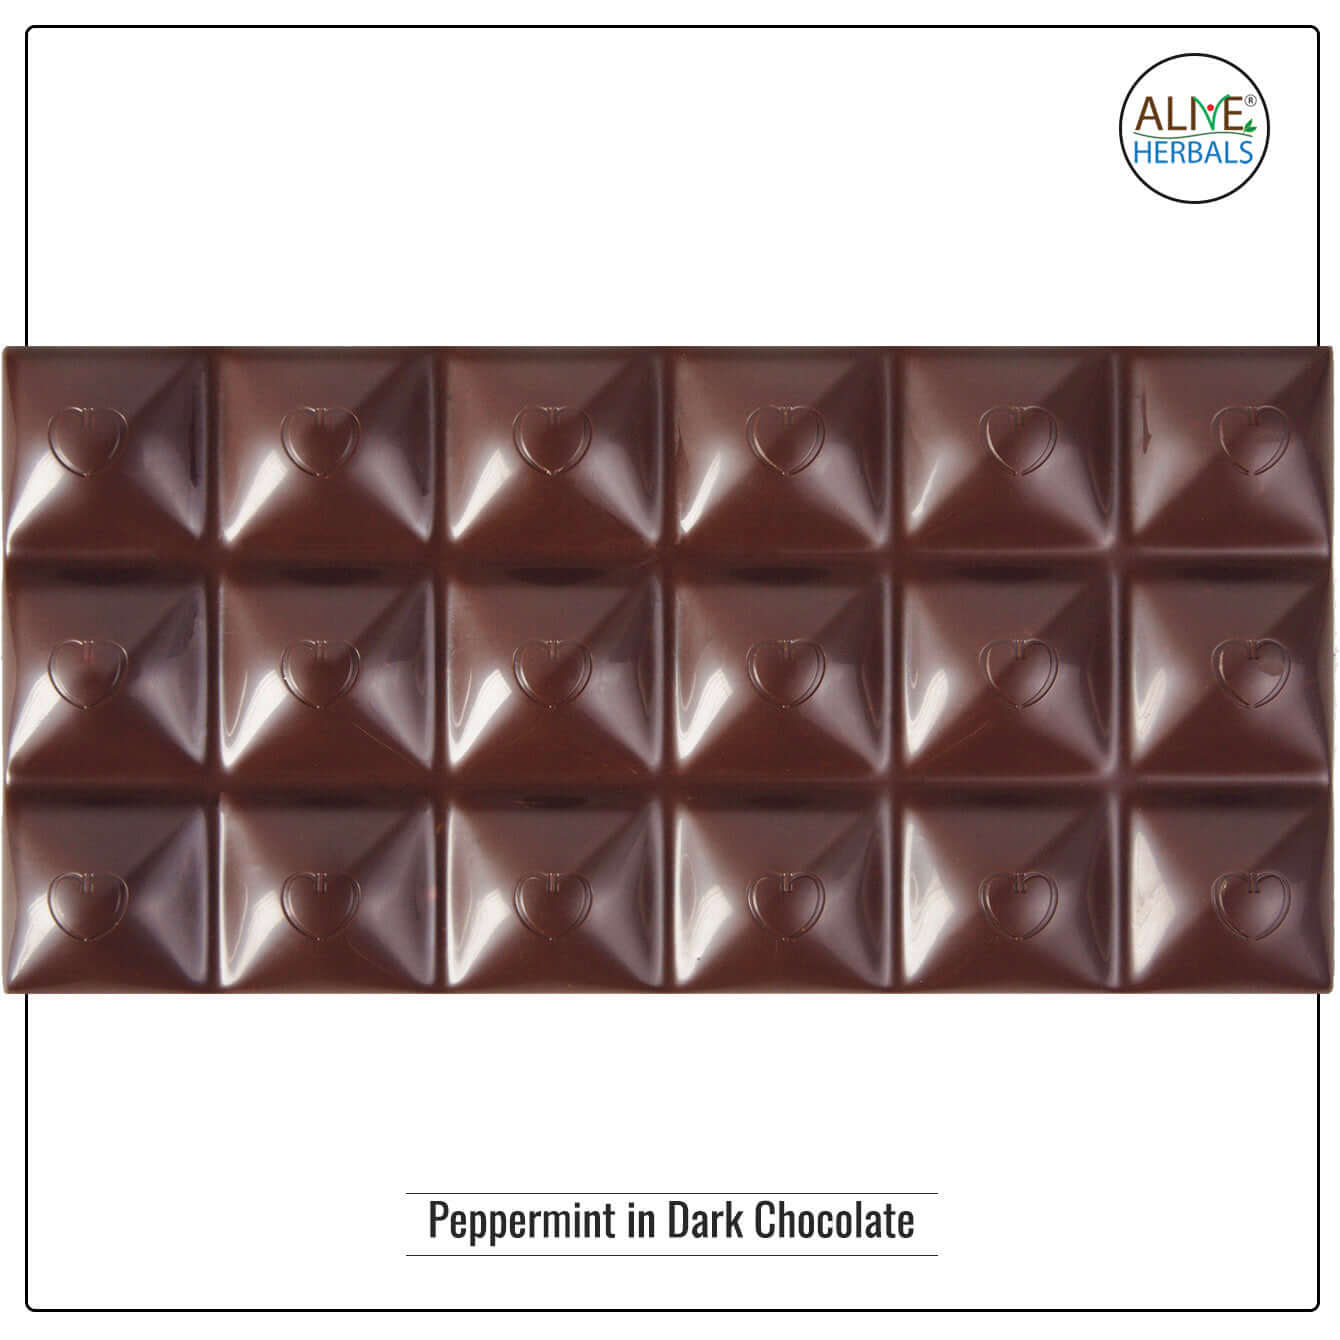 PEPPERMINT IN DARK CHOCOLATE - Buy at Natural Food Store | Alive Herbals.